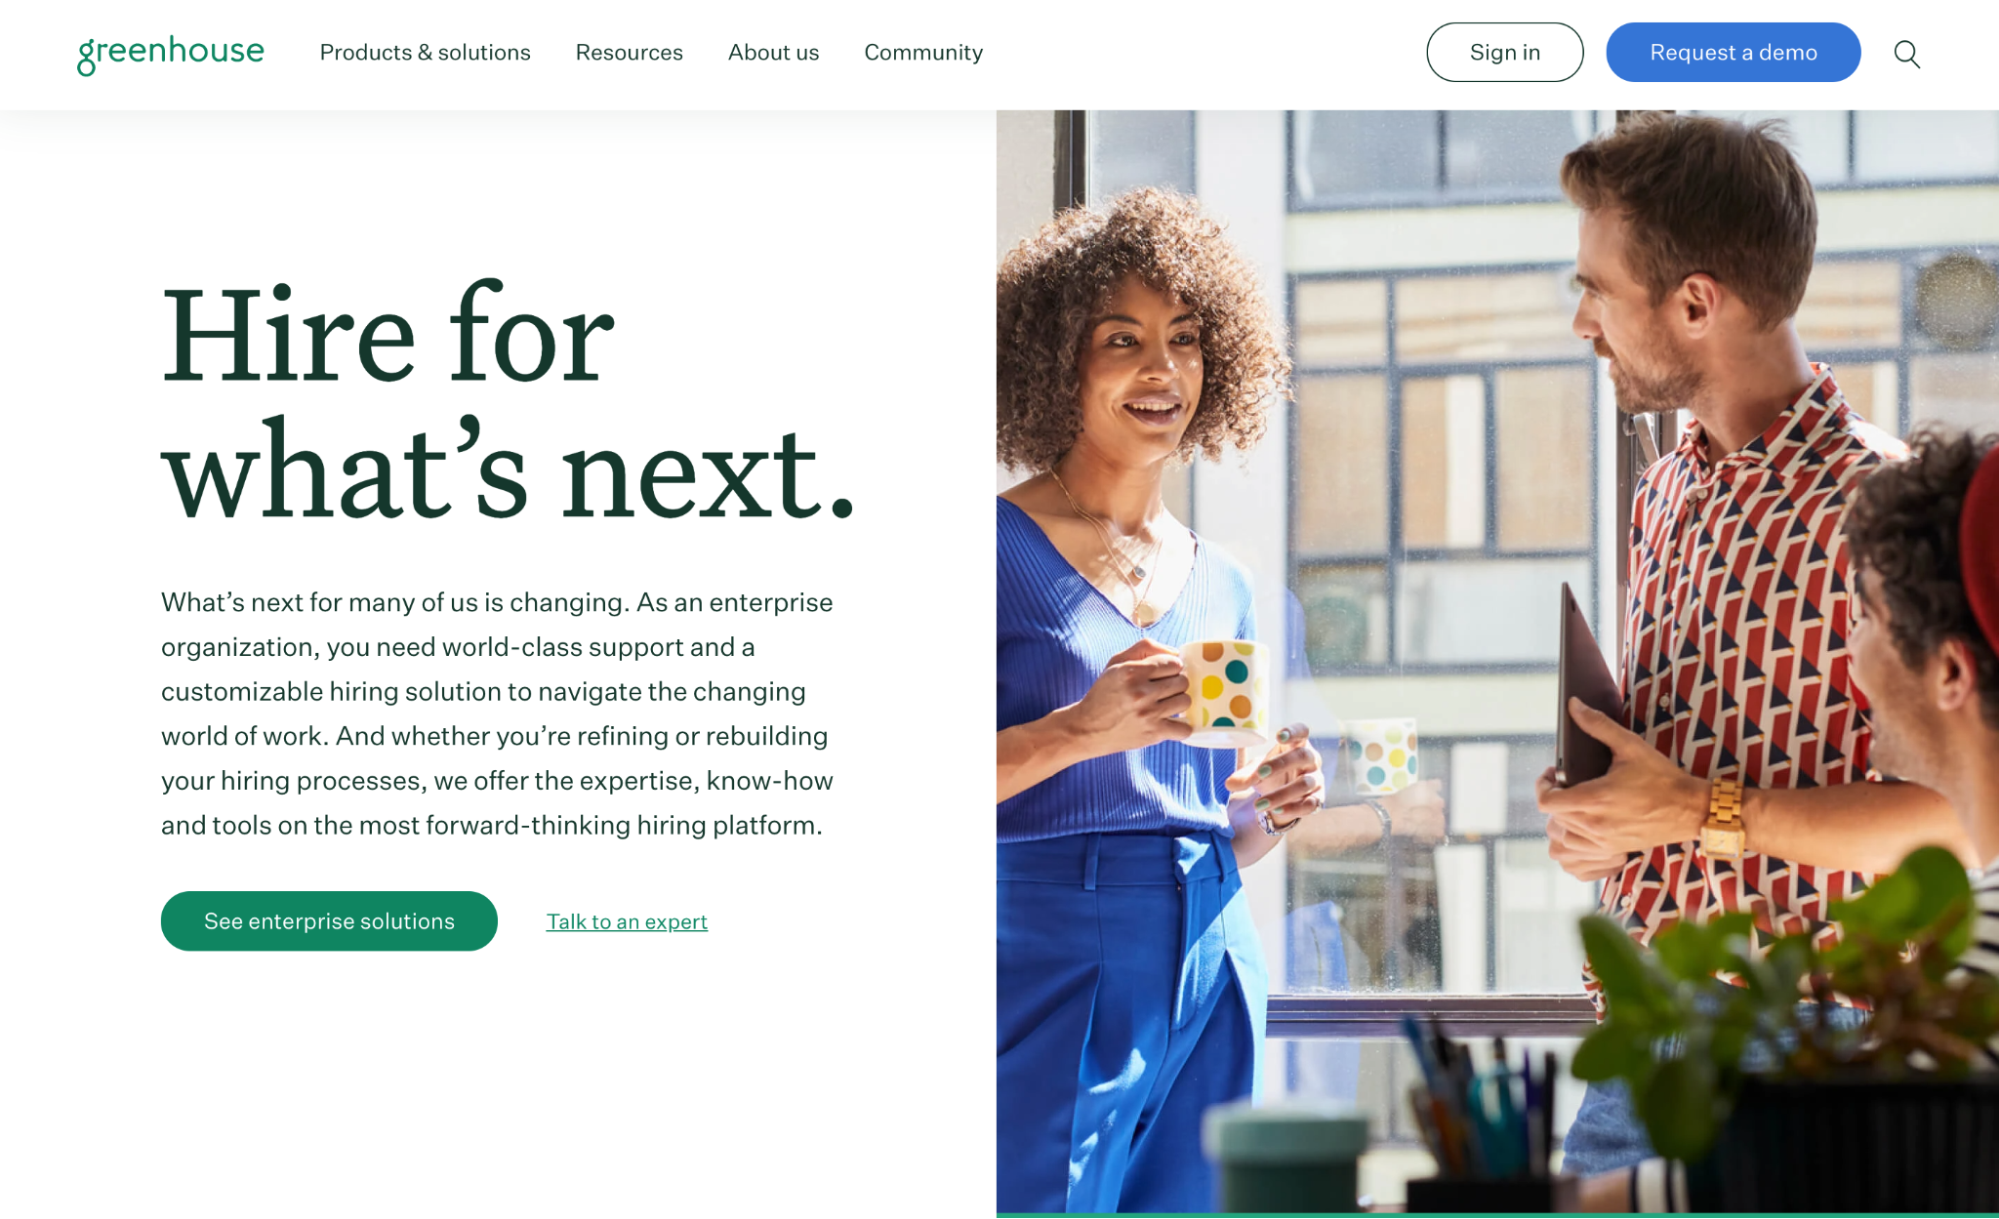 Greenhouse homepage tailors its main CTA for enterprise visitors to 'see enterprise solutions'